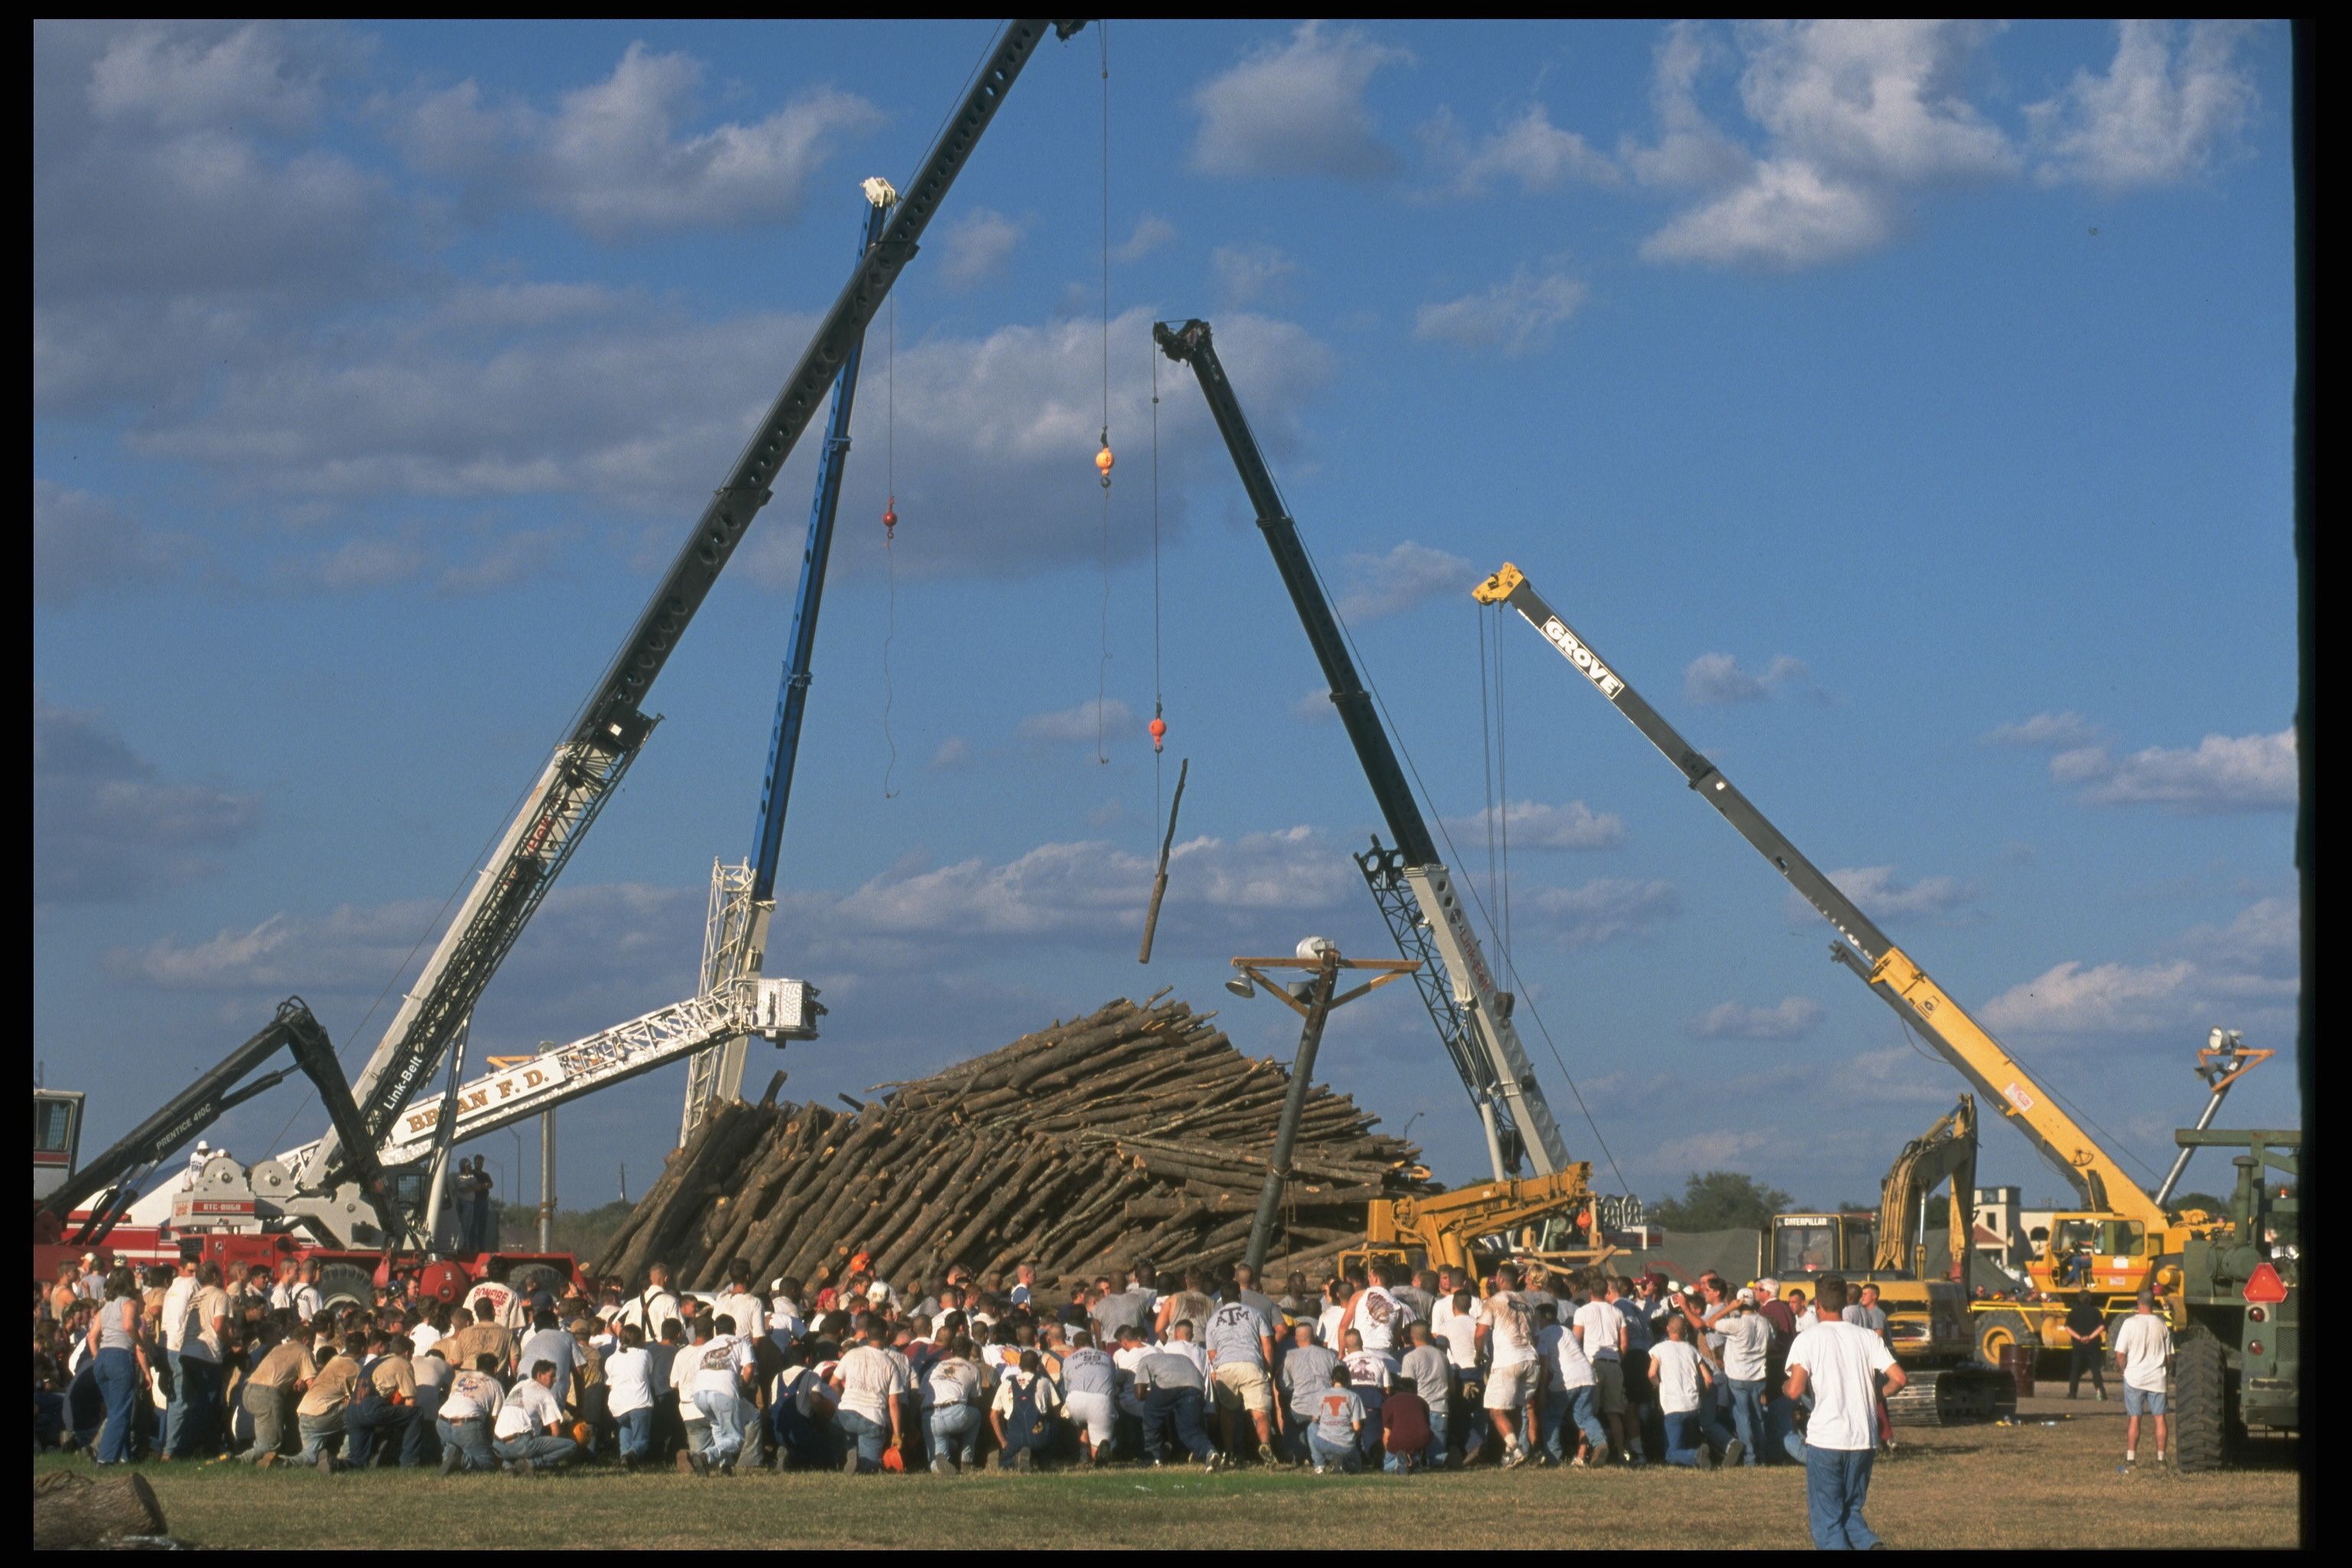 The 1999 tragedy led Texas A&M officials to put an end to the Aggie Bonfire tradition on campus in College Station. | Robert Daemmrich Photography Inc/Sygma via Getty Images)